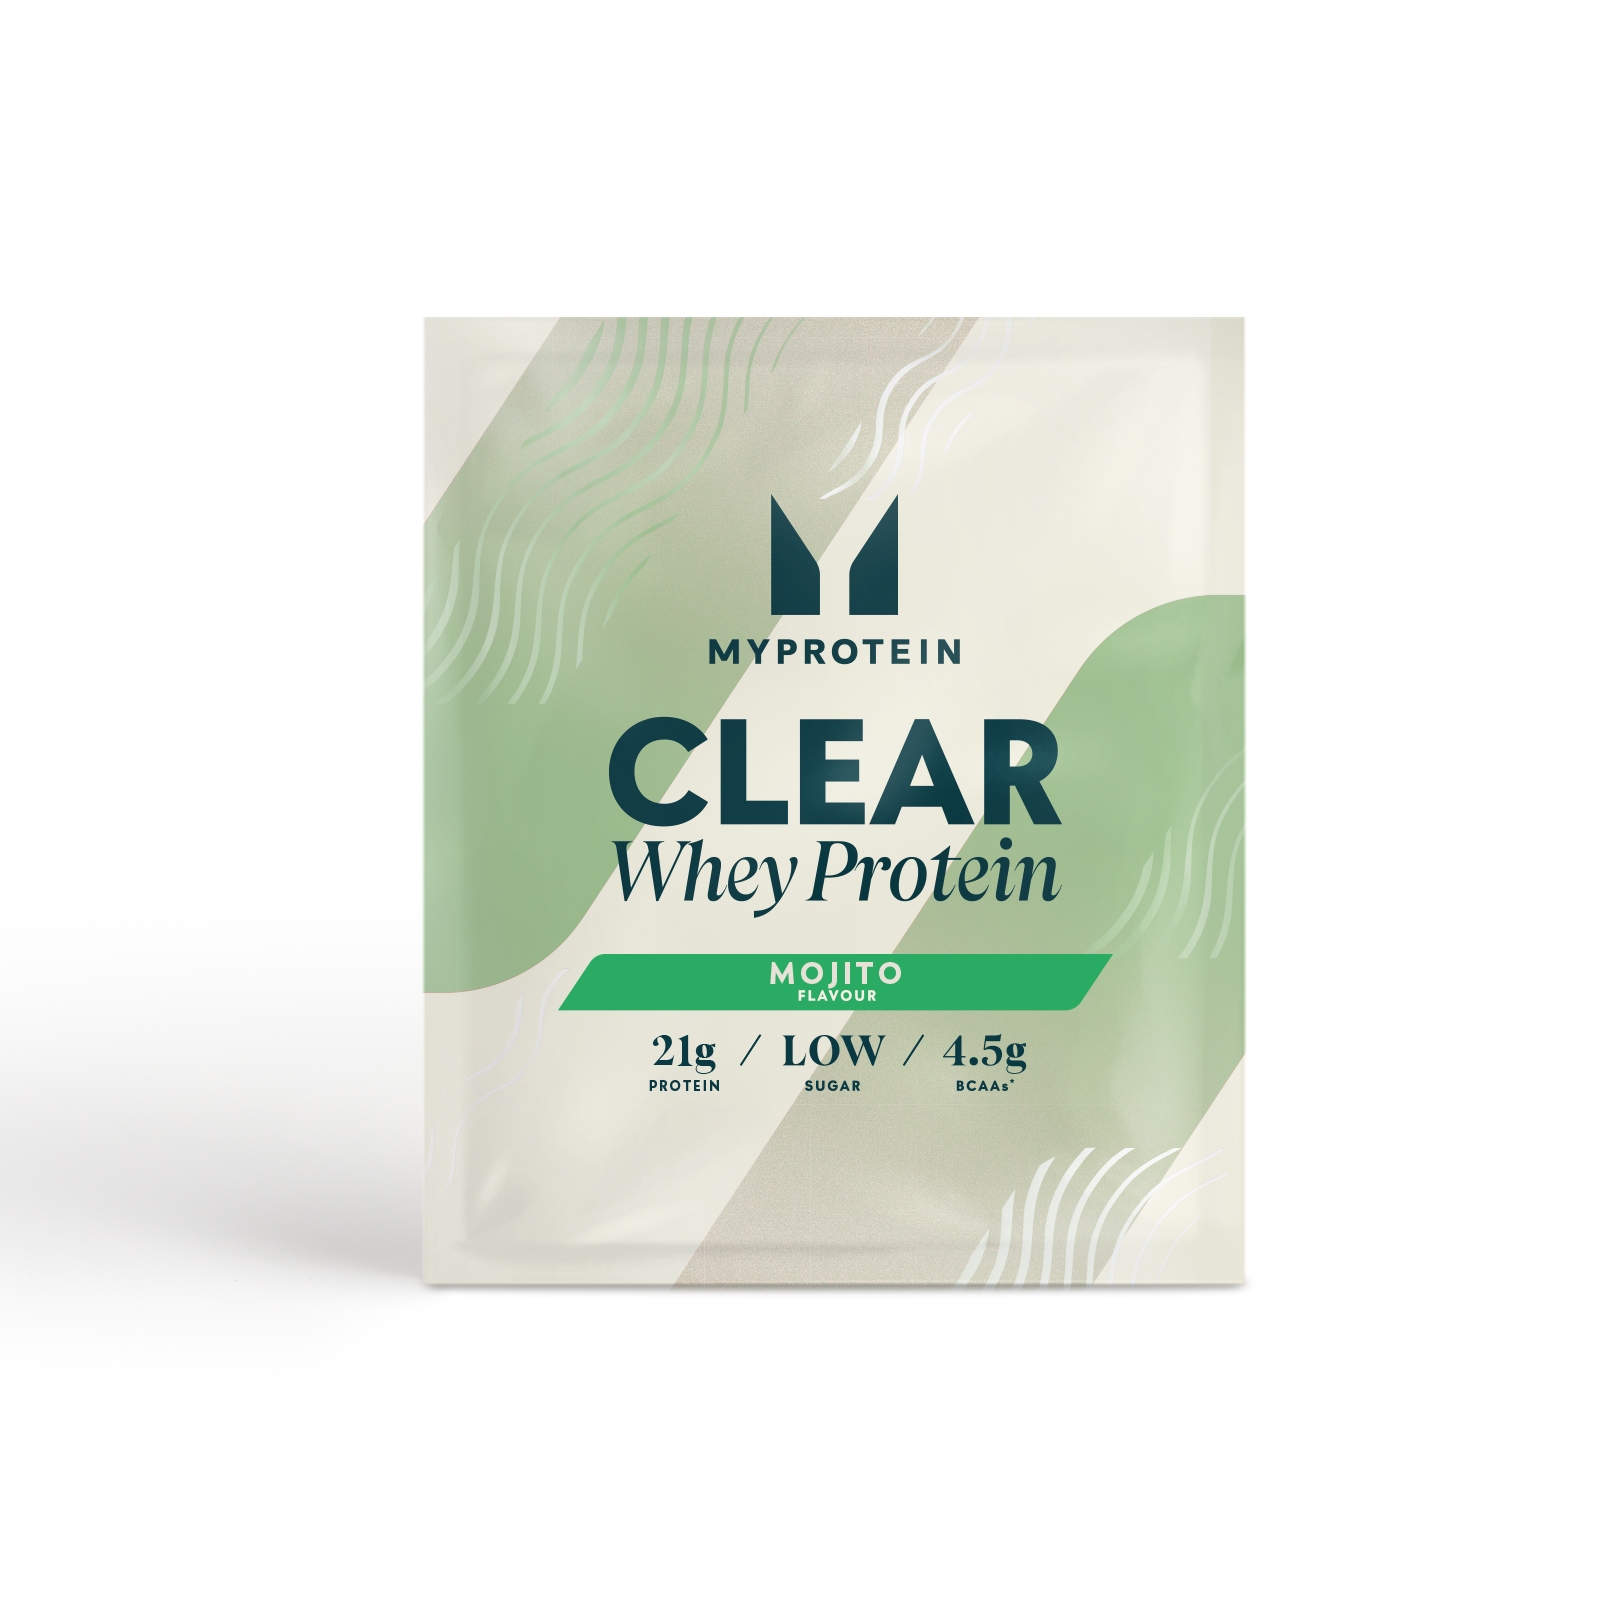 Image of Myprotein Clear Whey Isolate (Sample) - 1servings - Mojito